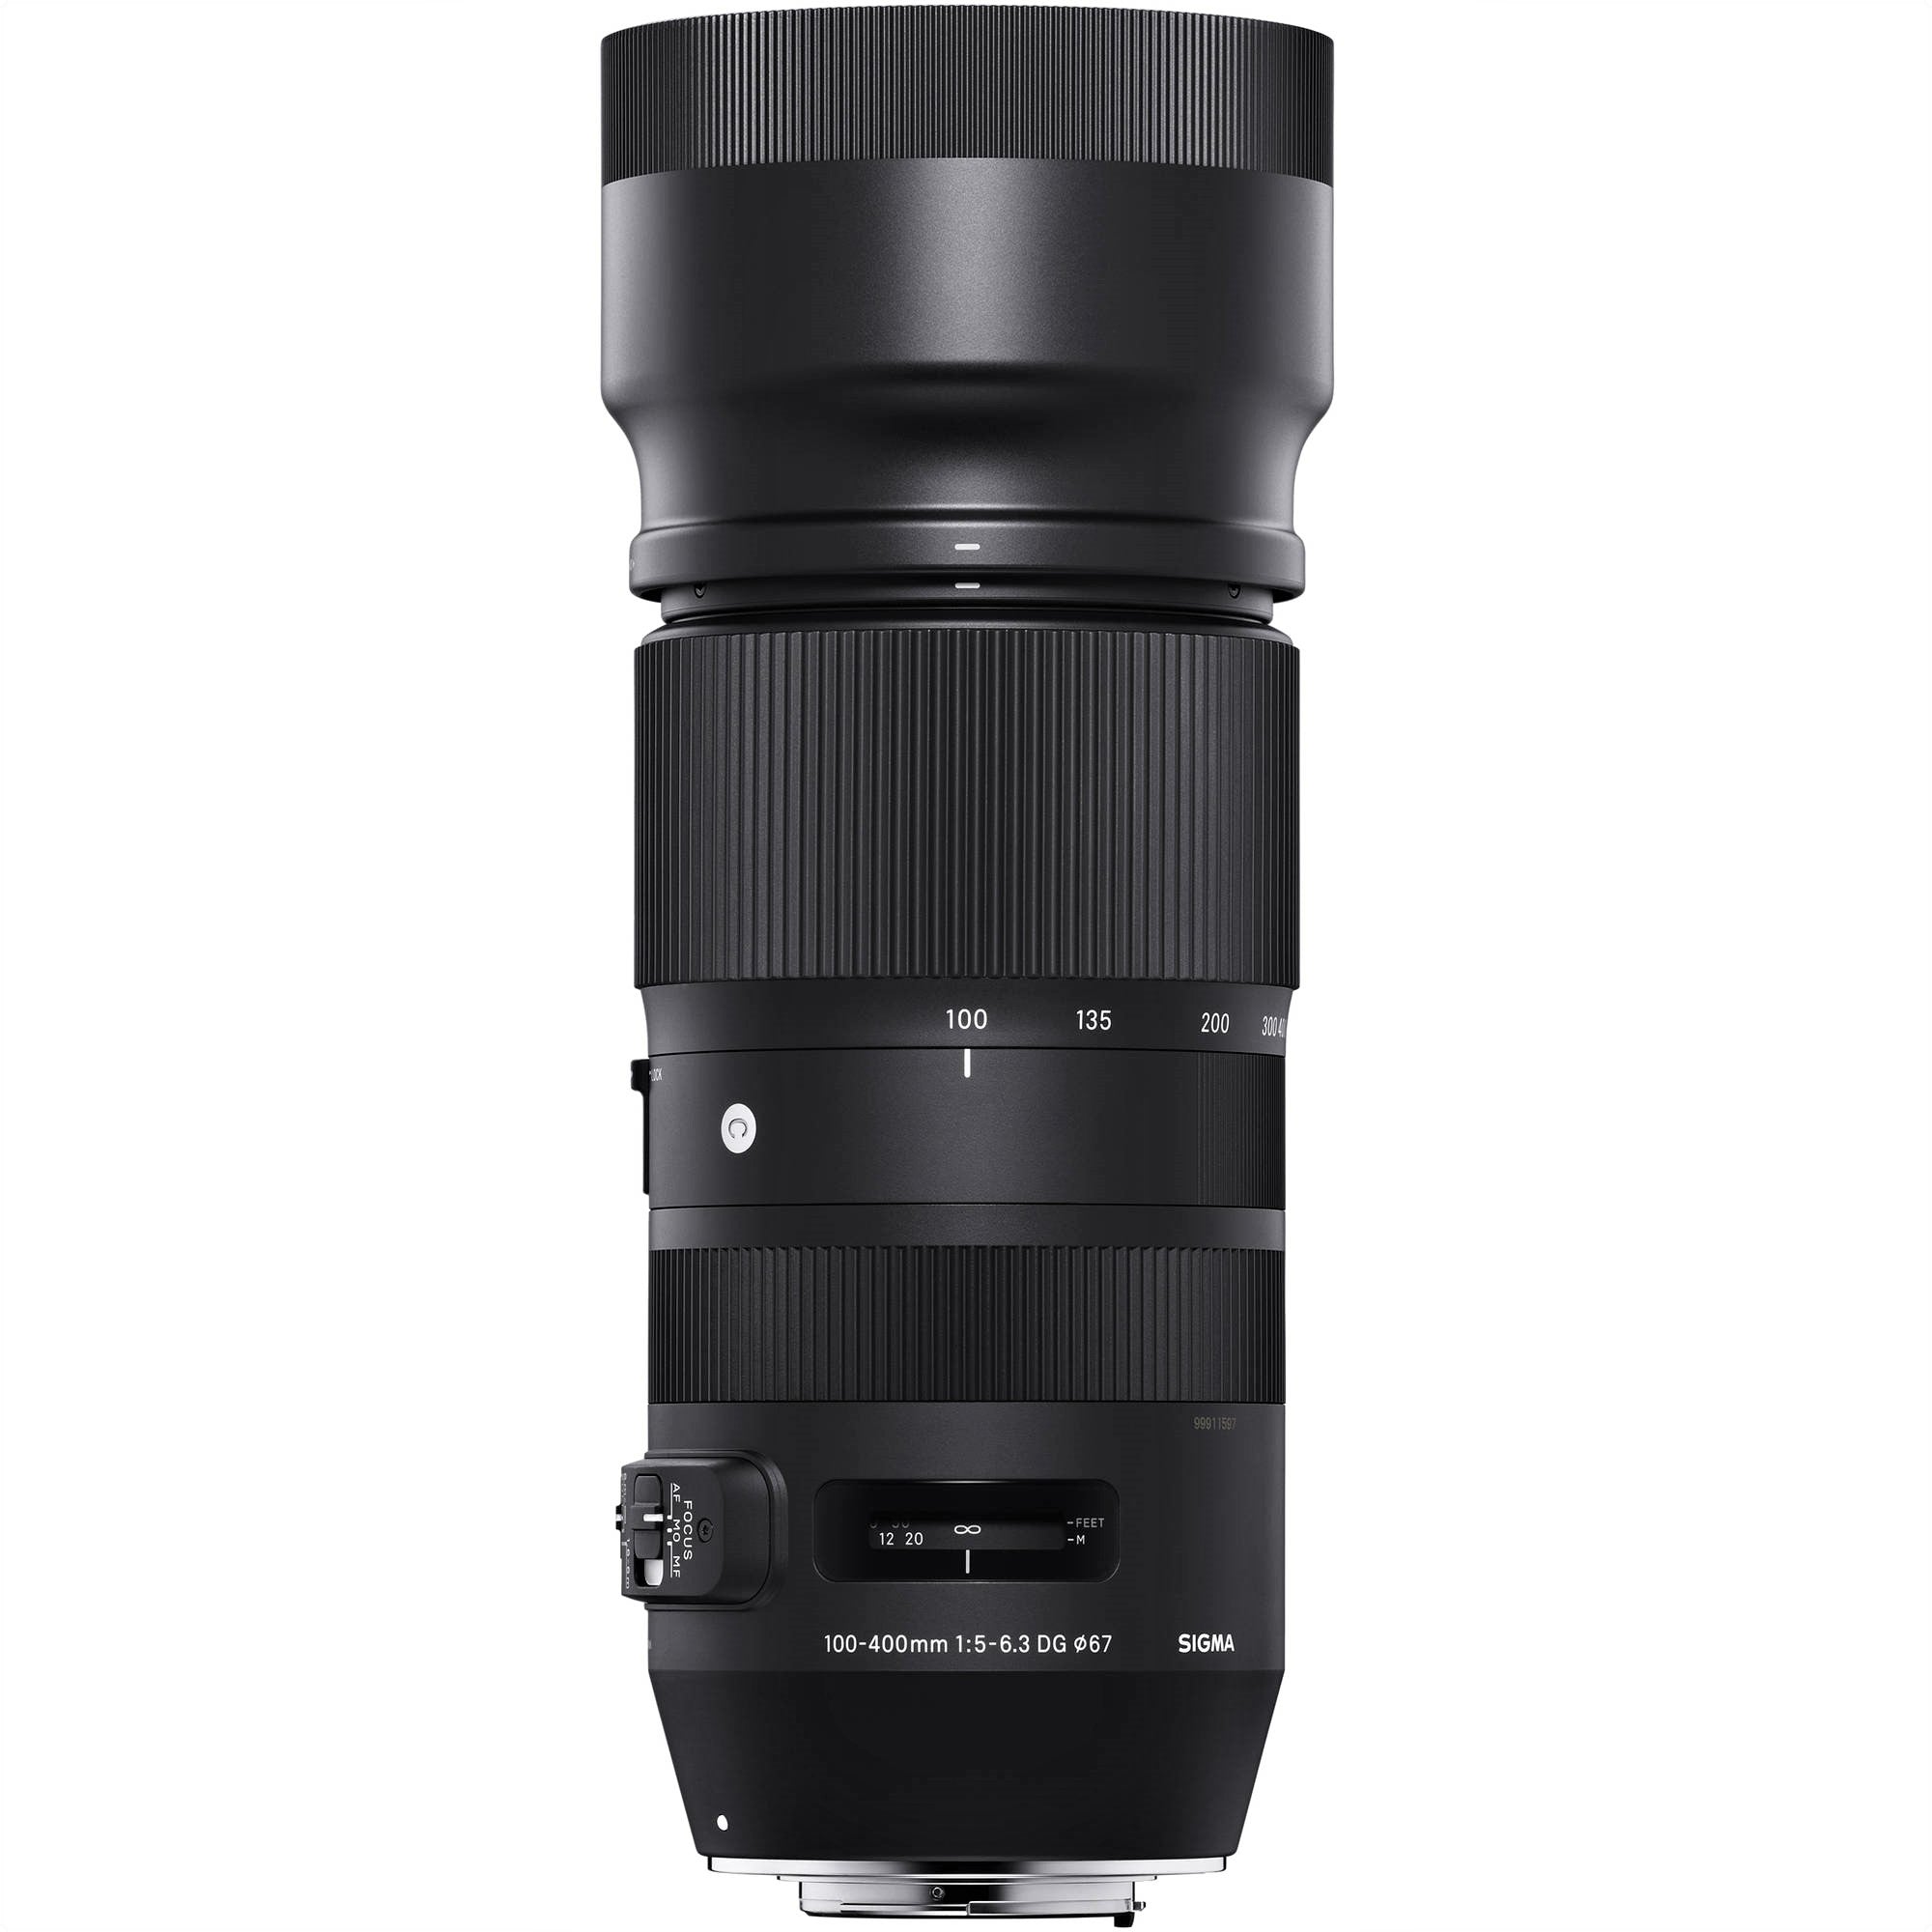 Sigma 100-400mm F5-6.3 DG OS HSM Contemporary Lens for Nikon F with Attached Lens Hood on the Top